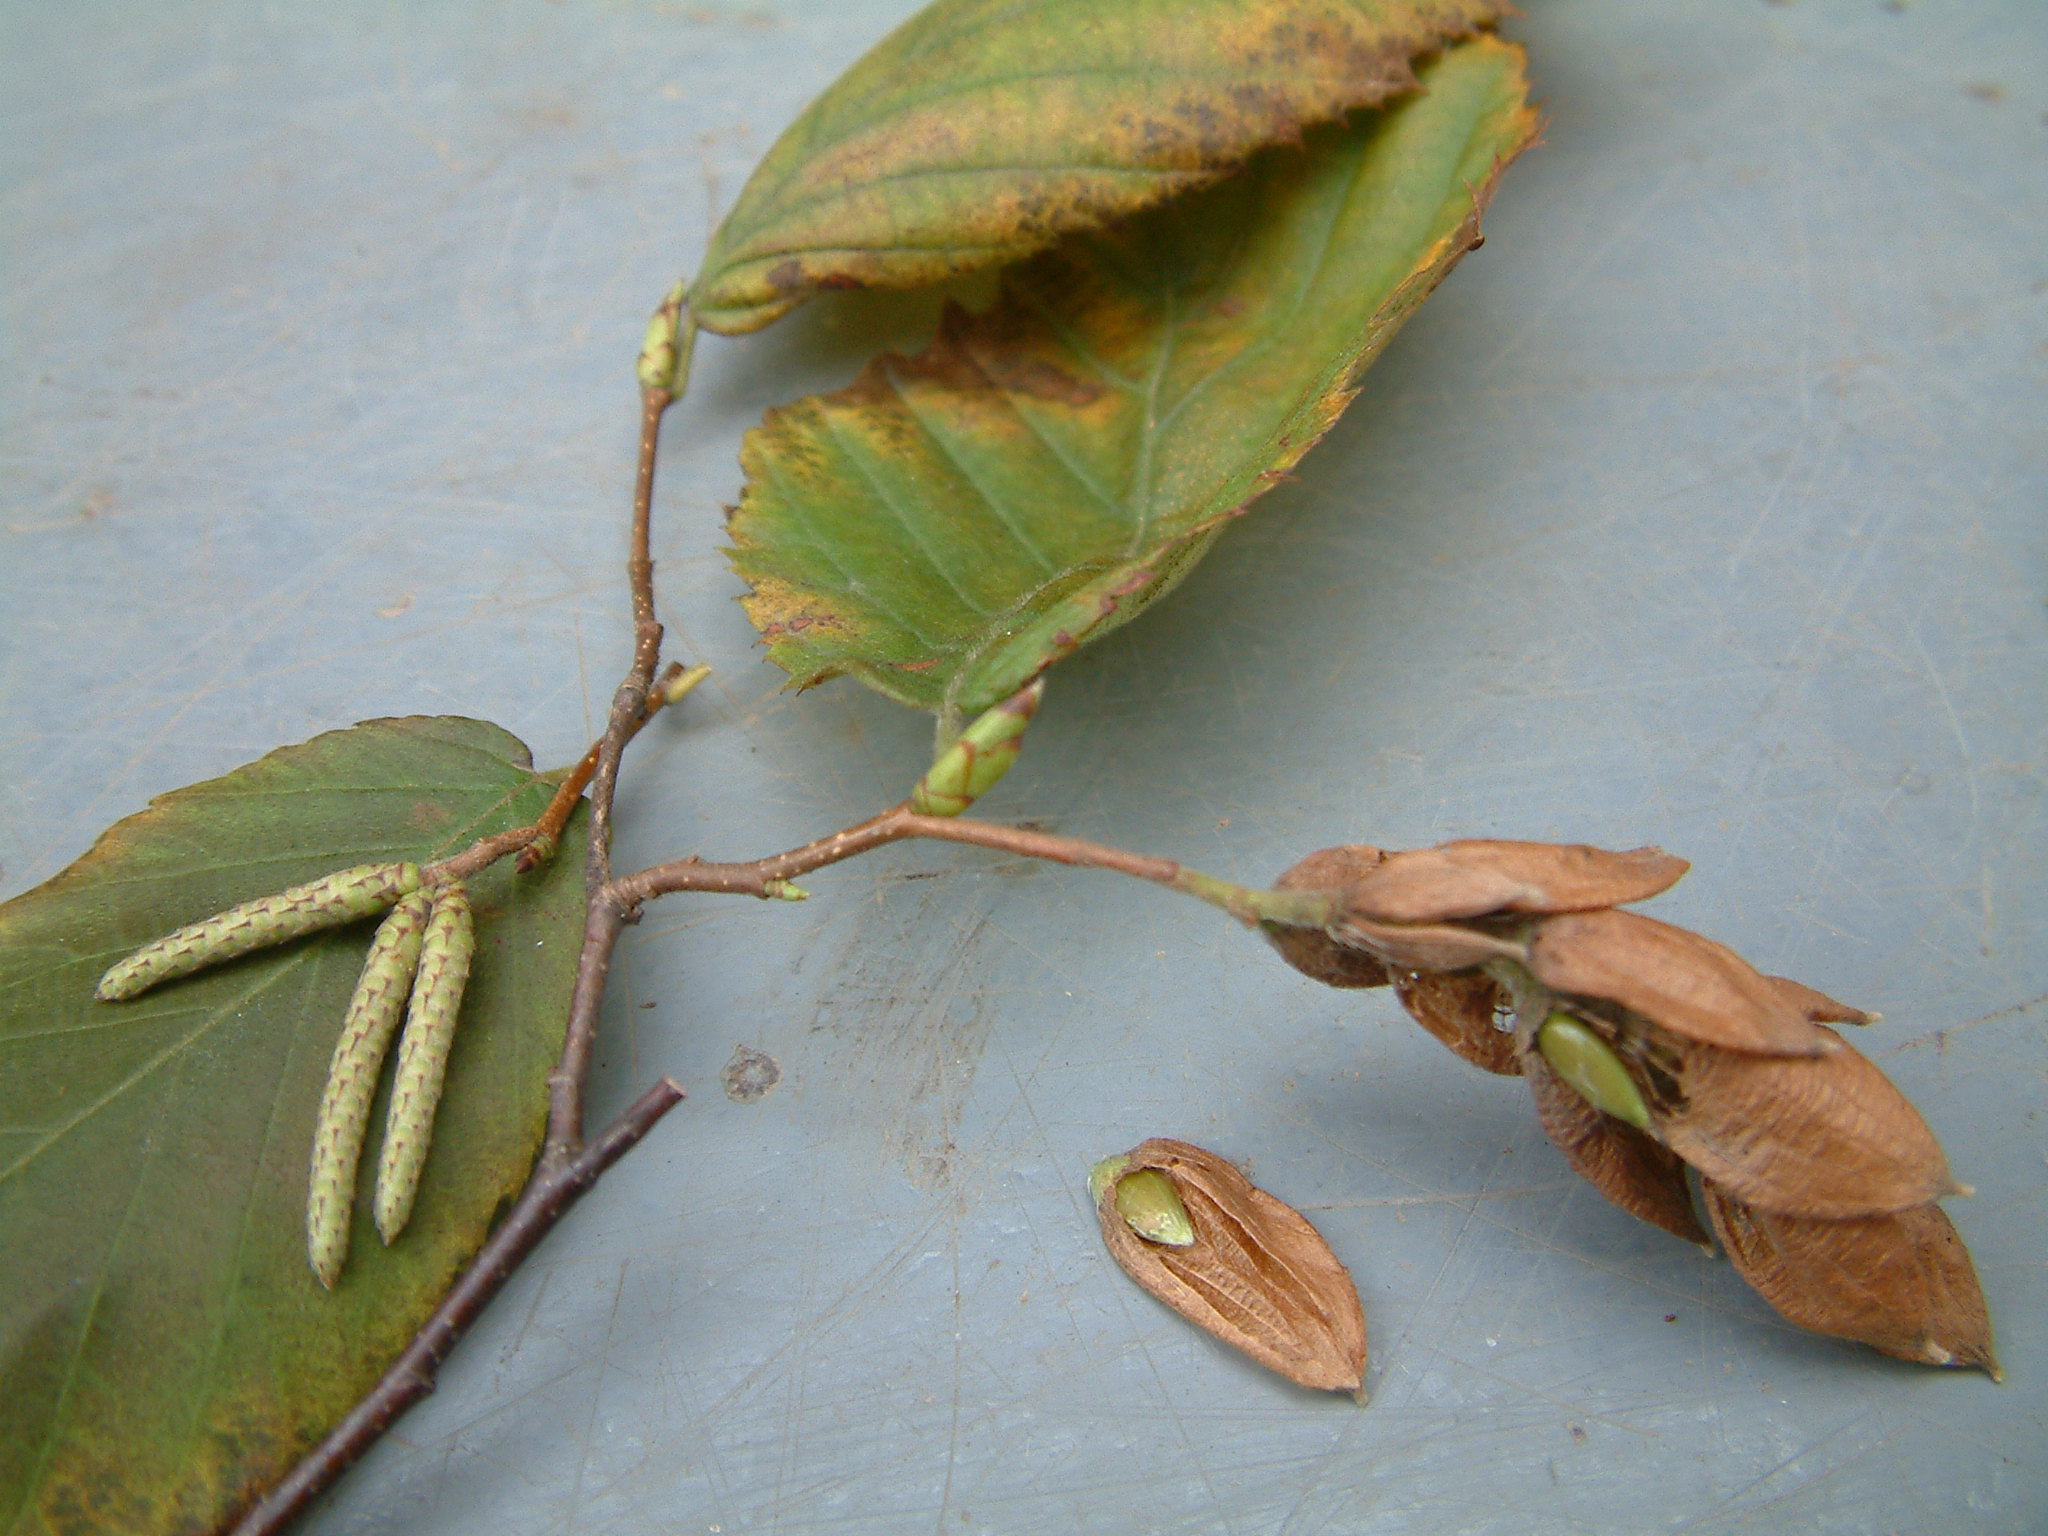 The Scientific Name is Ostrya virginiana. You will likely hear them called American Hop-hornbeam, Eastern  Hop Hornbeam. This picture shows the Note the dry paper covering around the fruits, the immature male catkins, and the two-toned green and brown buds (Carpinus caroliniana has brown buds). of Ostrya virginiana